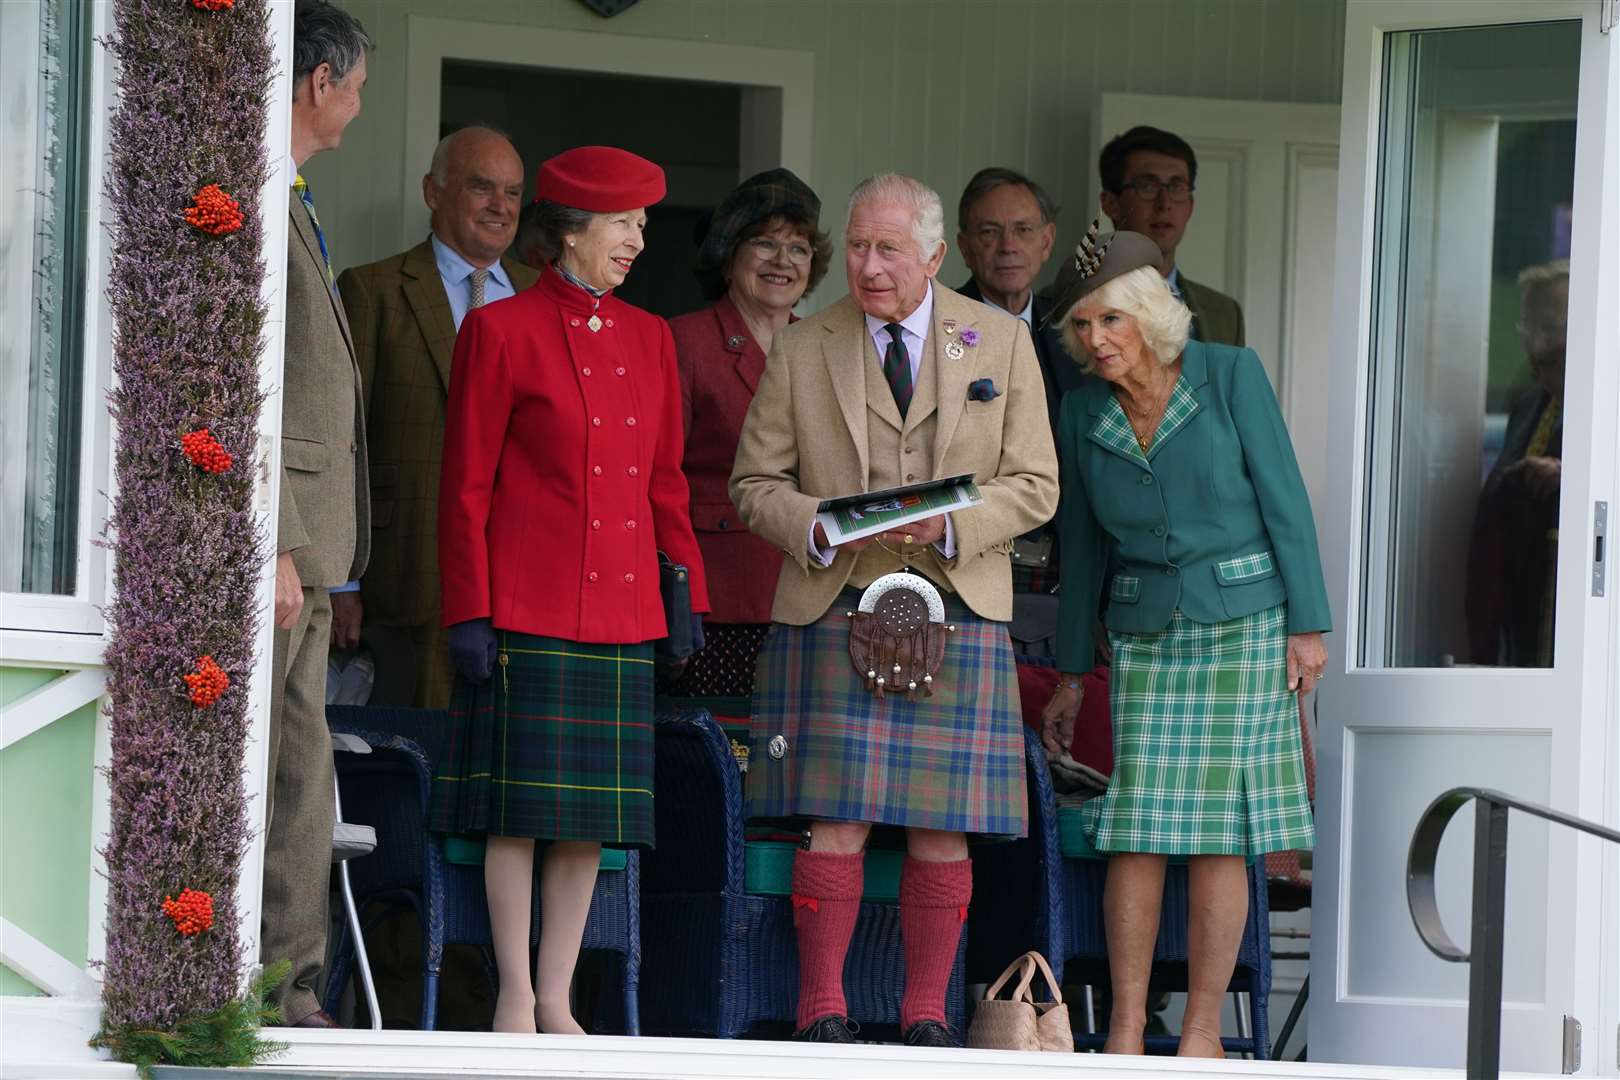 They were joined by the King’s sister, the Princess Royal, and her husband Vice Admiral Sir Tim Laurence (obscured, far left) (Andrew Milligan/PA)